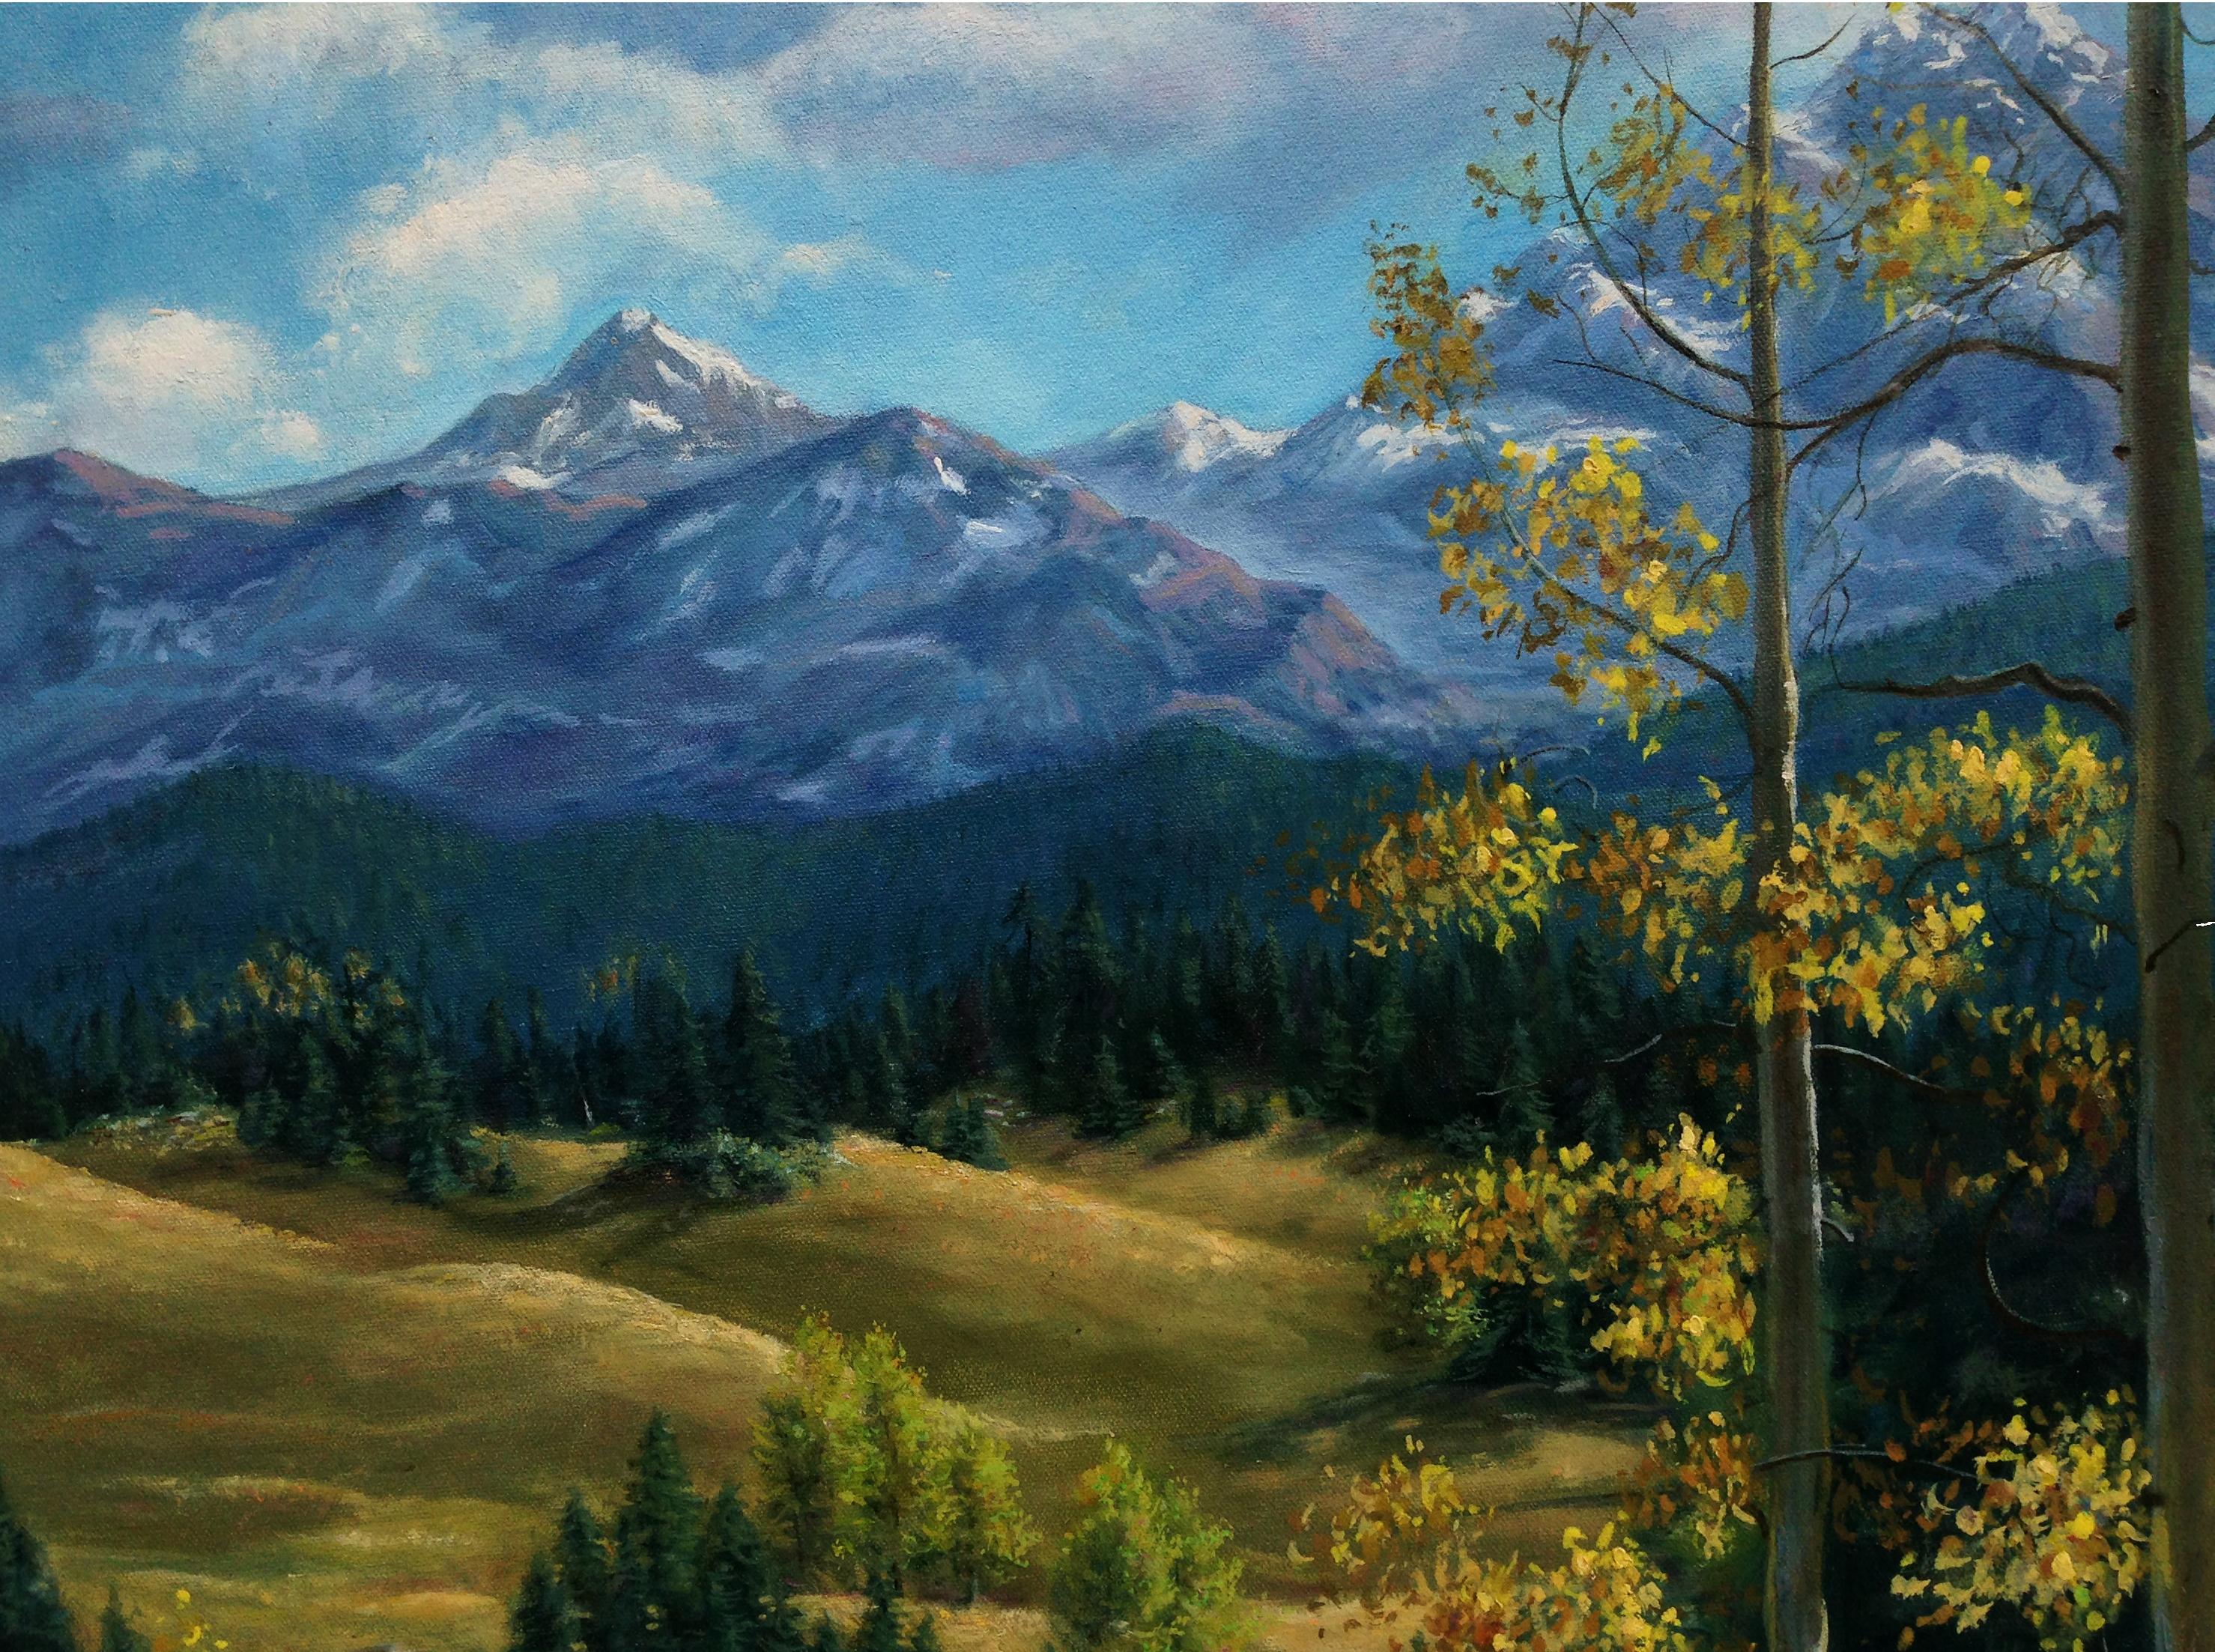 Sierra Mountains in Autumn Landscape - Painting by W. R. Rolls